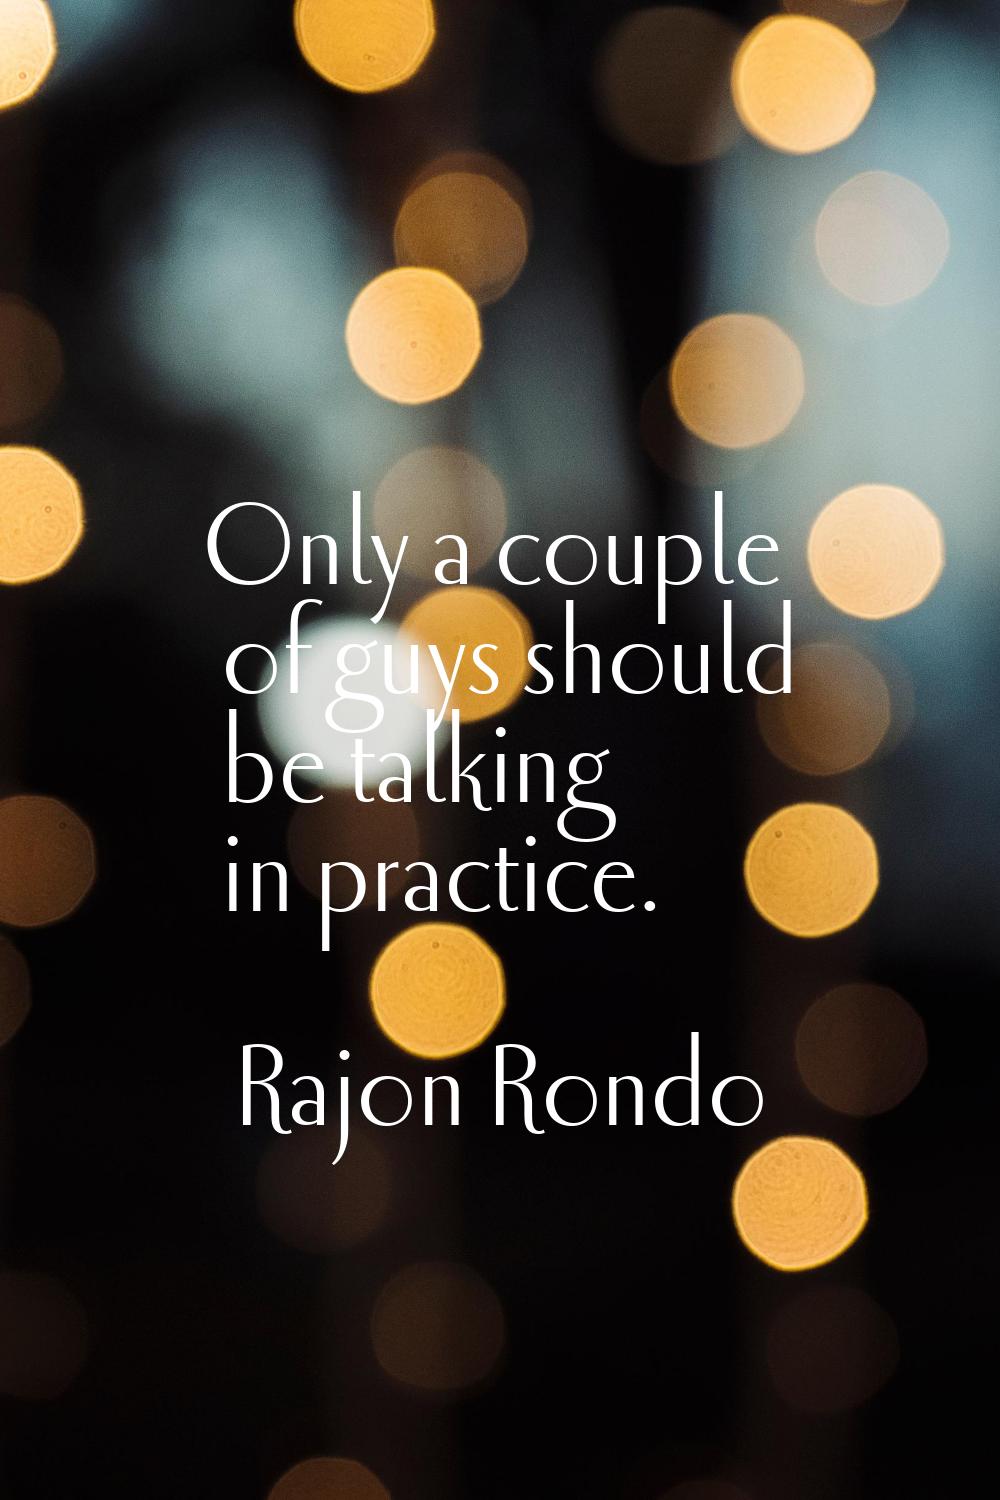 Only a couple of guys should be talking in practice.